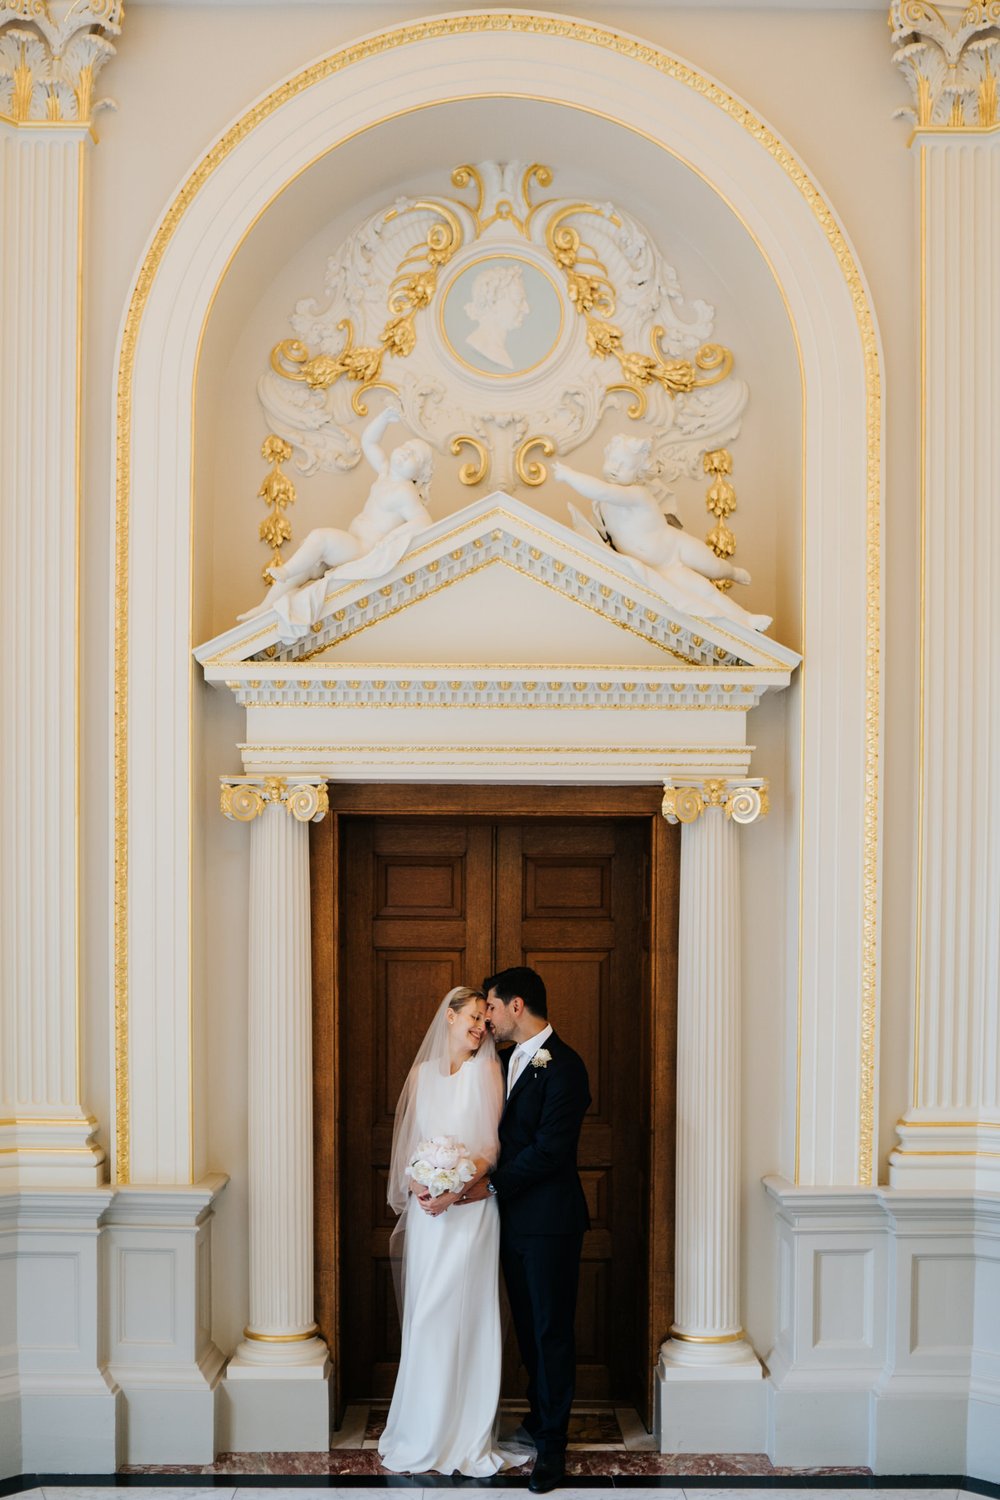 Bride and groom embrace lovingly in beautiful, ornate door frame of Orleans House Gallery